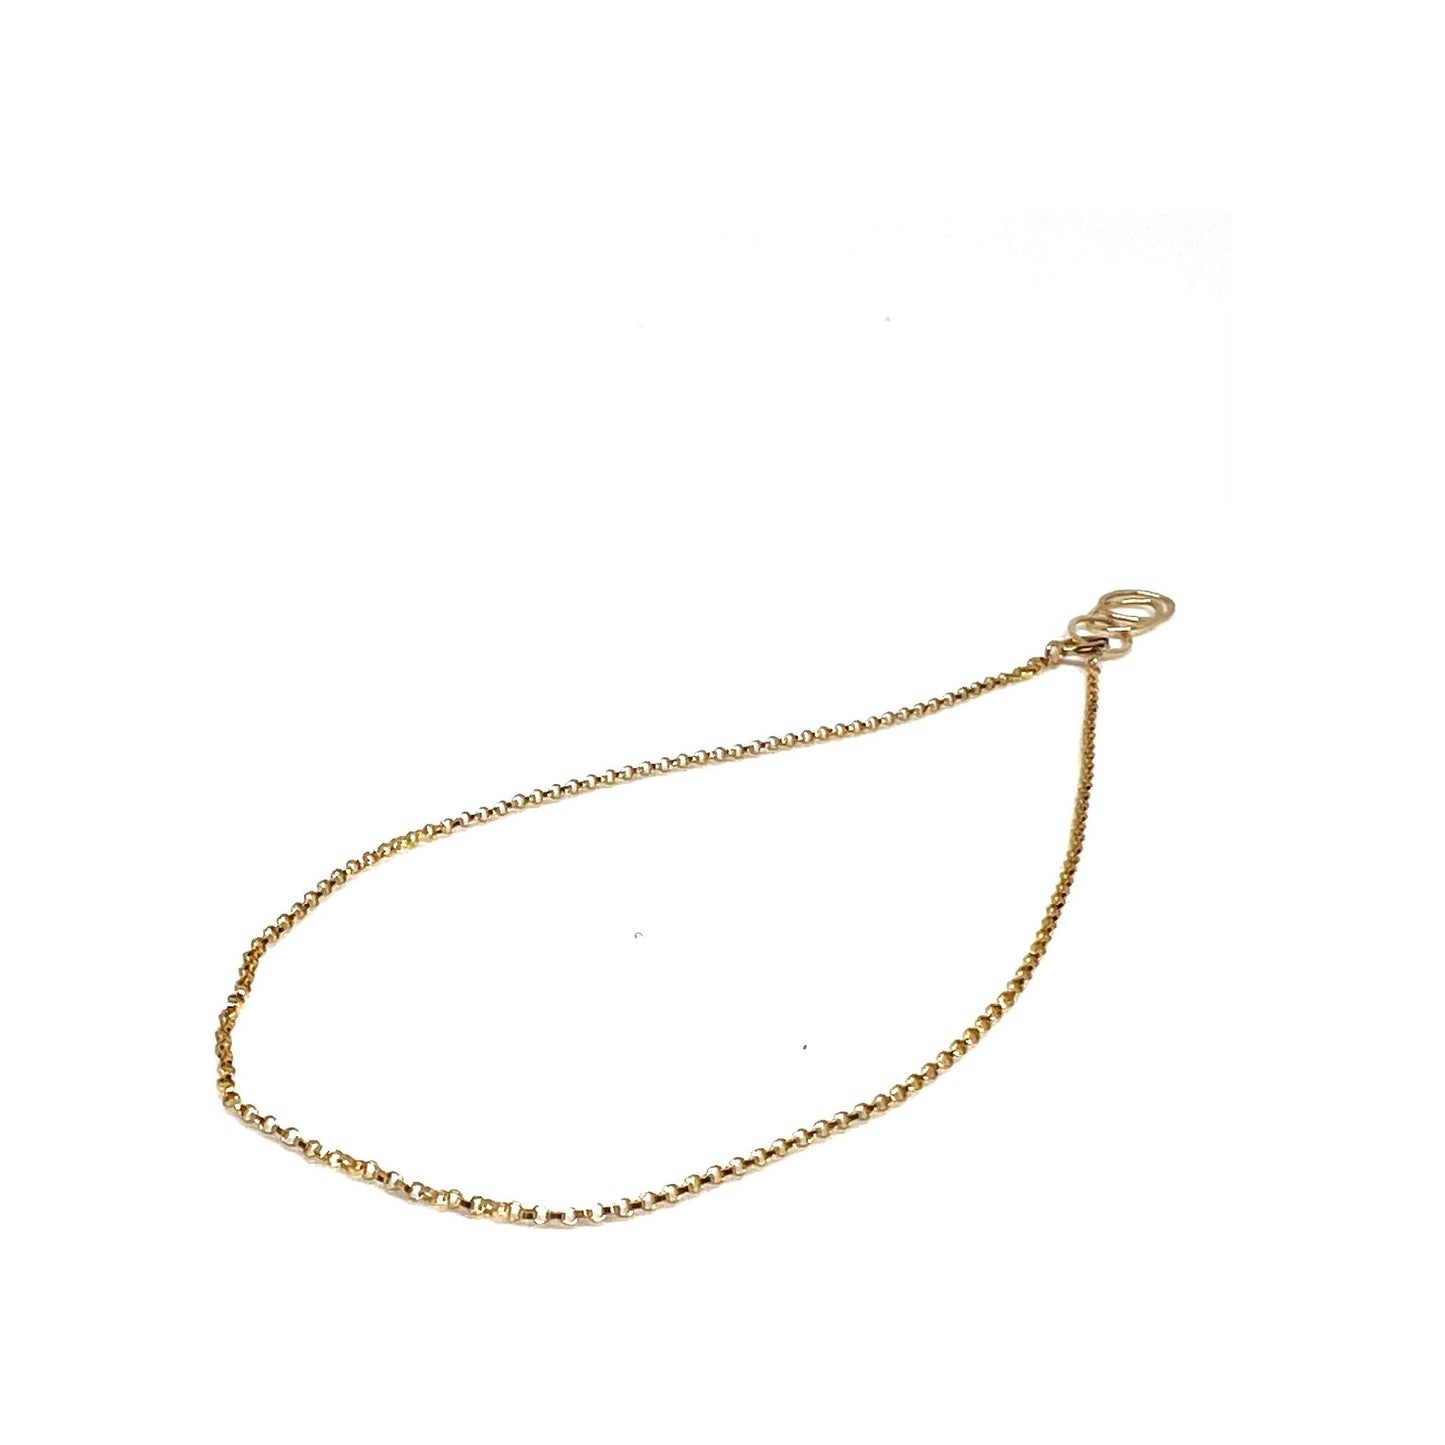 Dainty gold anklet